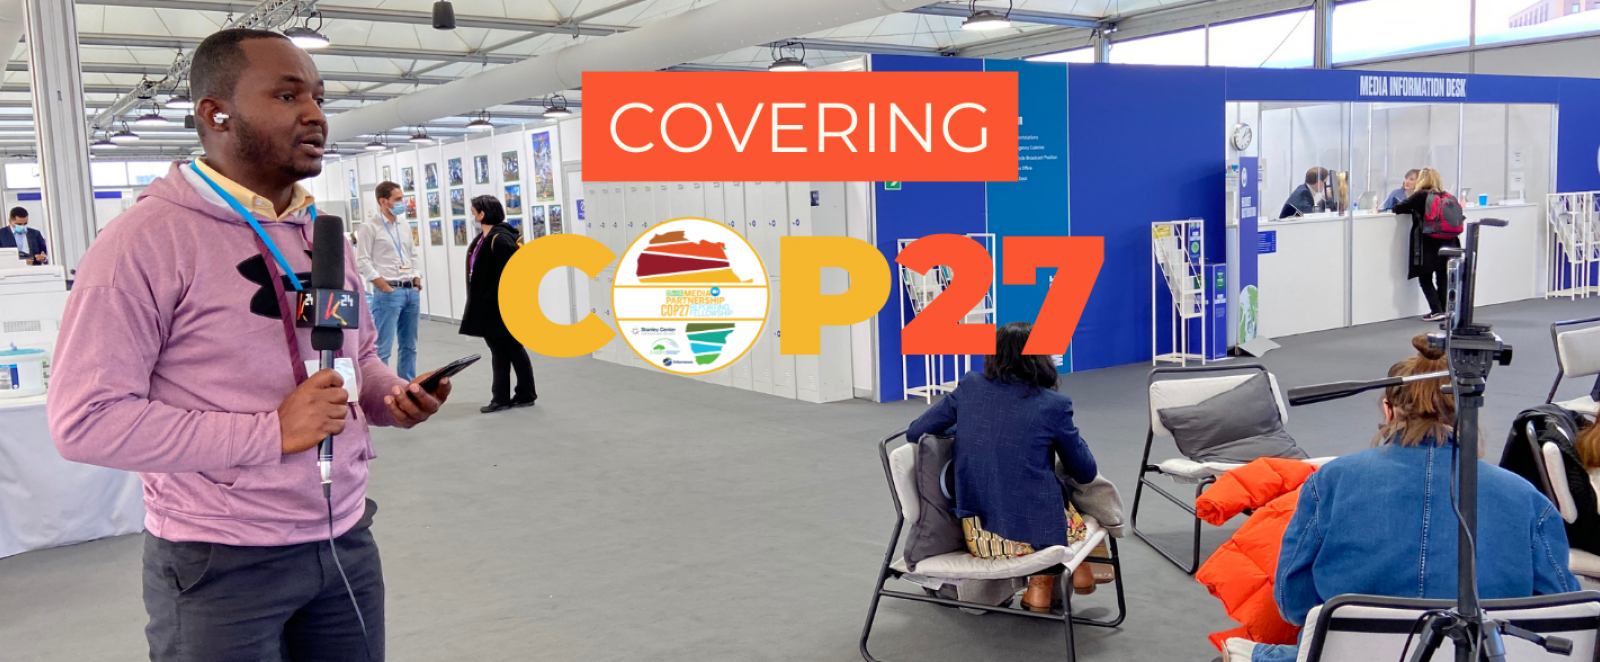 Covering COP27